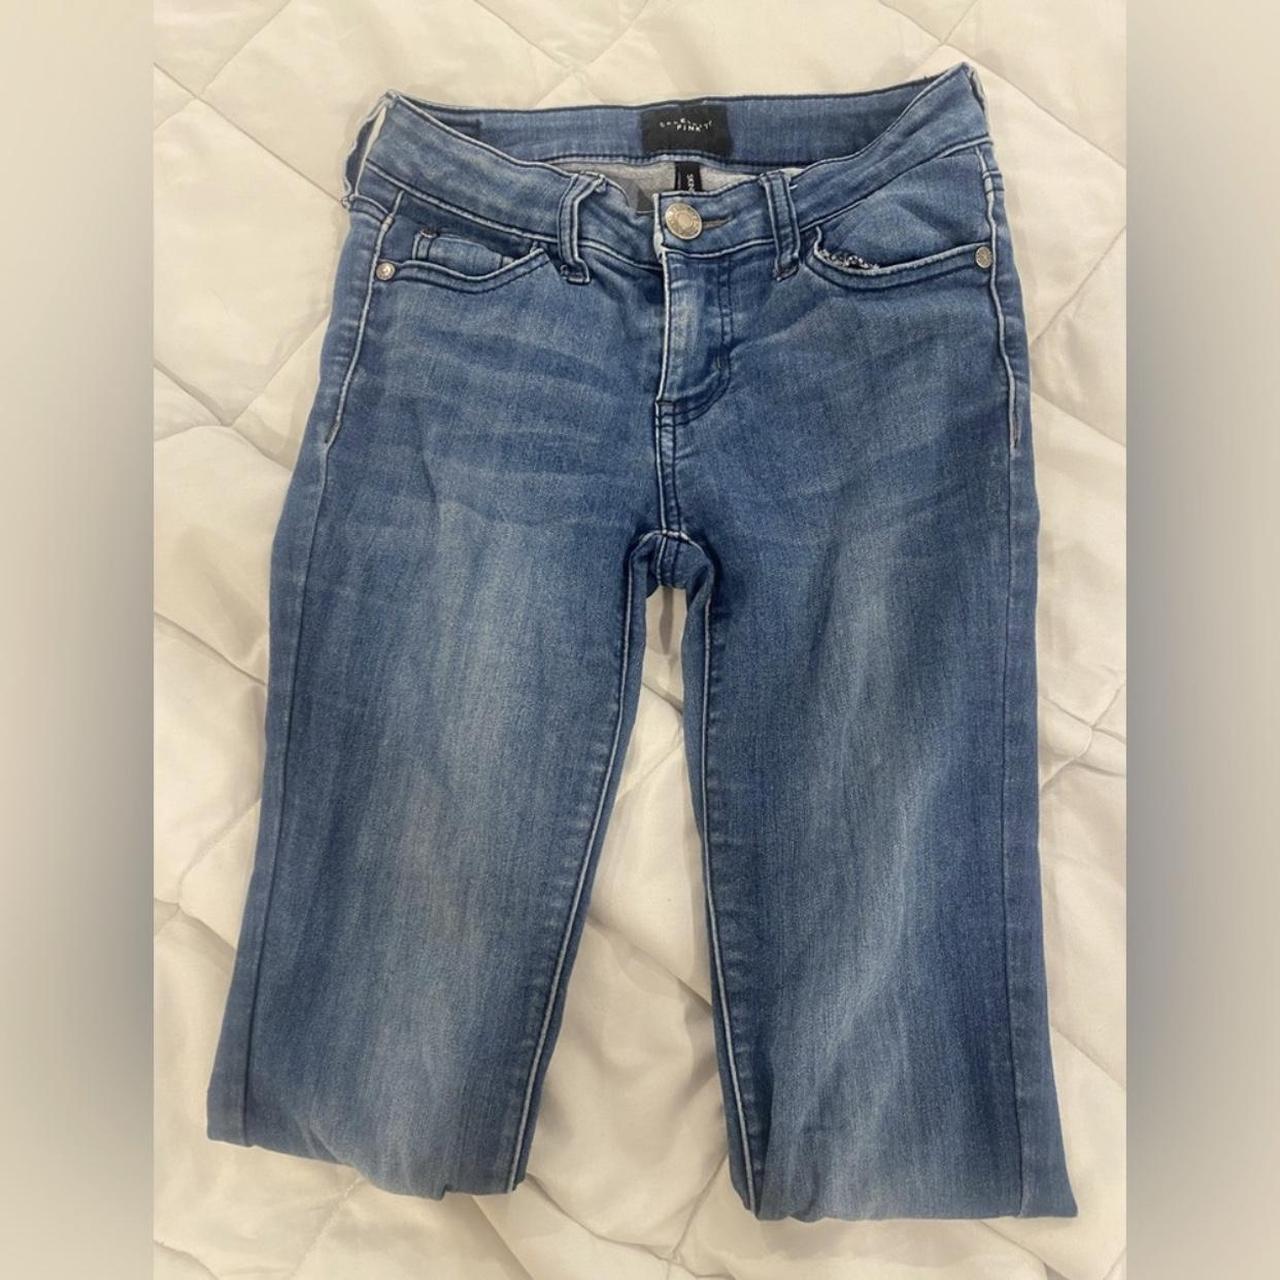 Previously loved skinny jeans. Damage/ wear is shown... - Depop